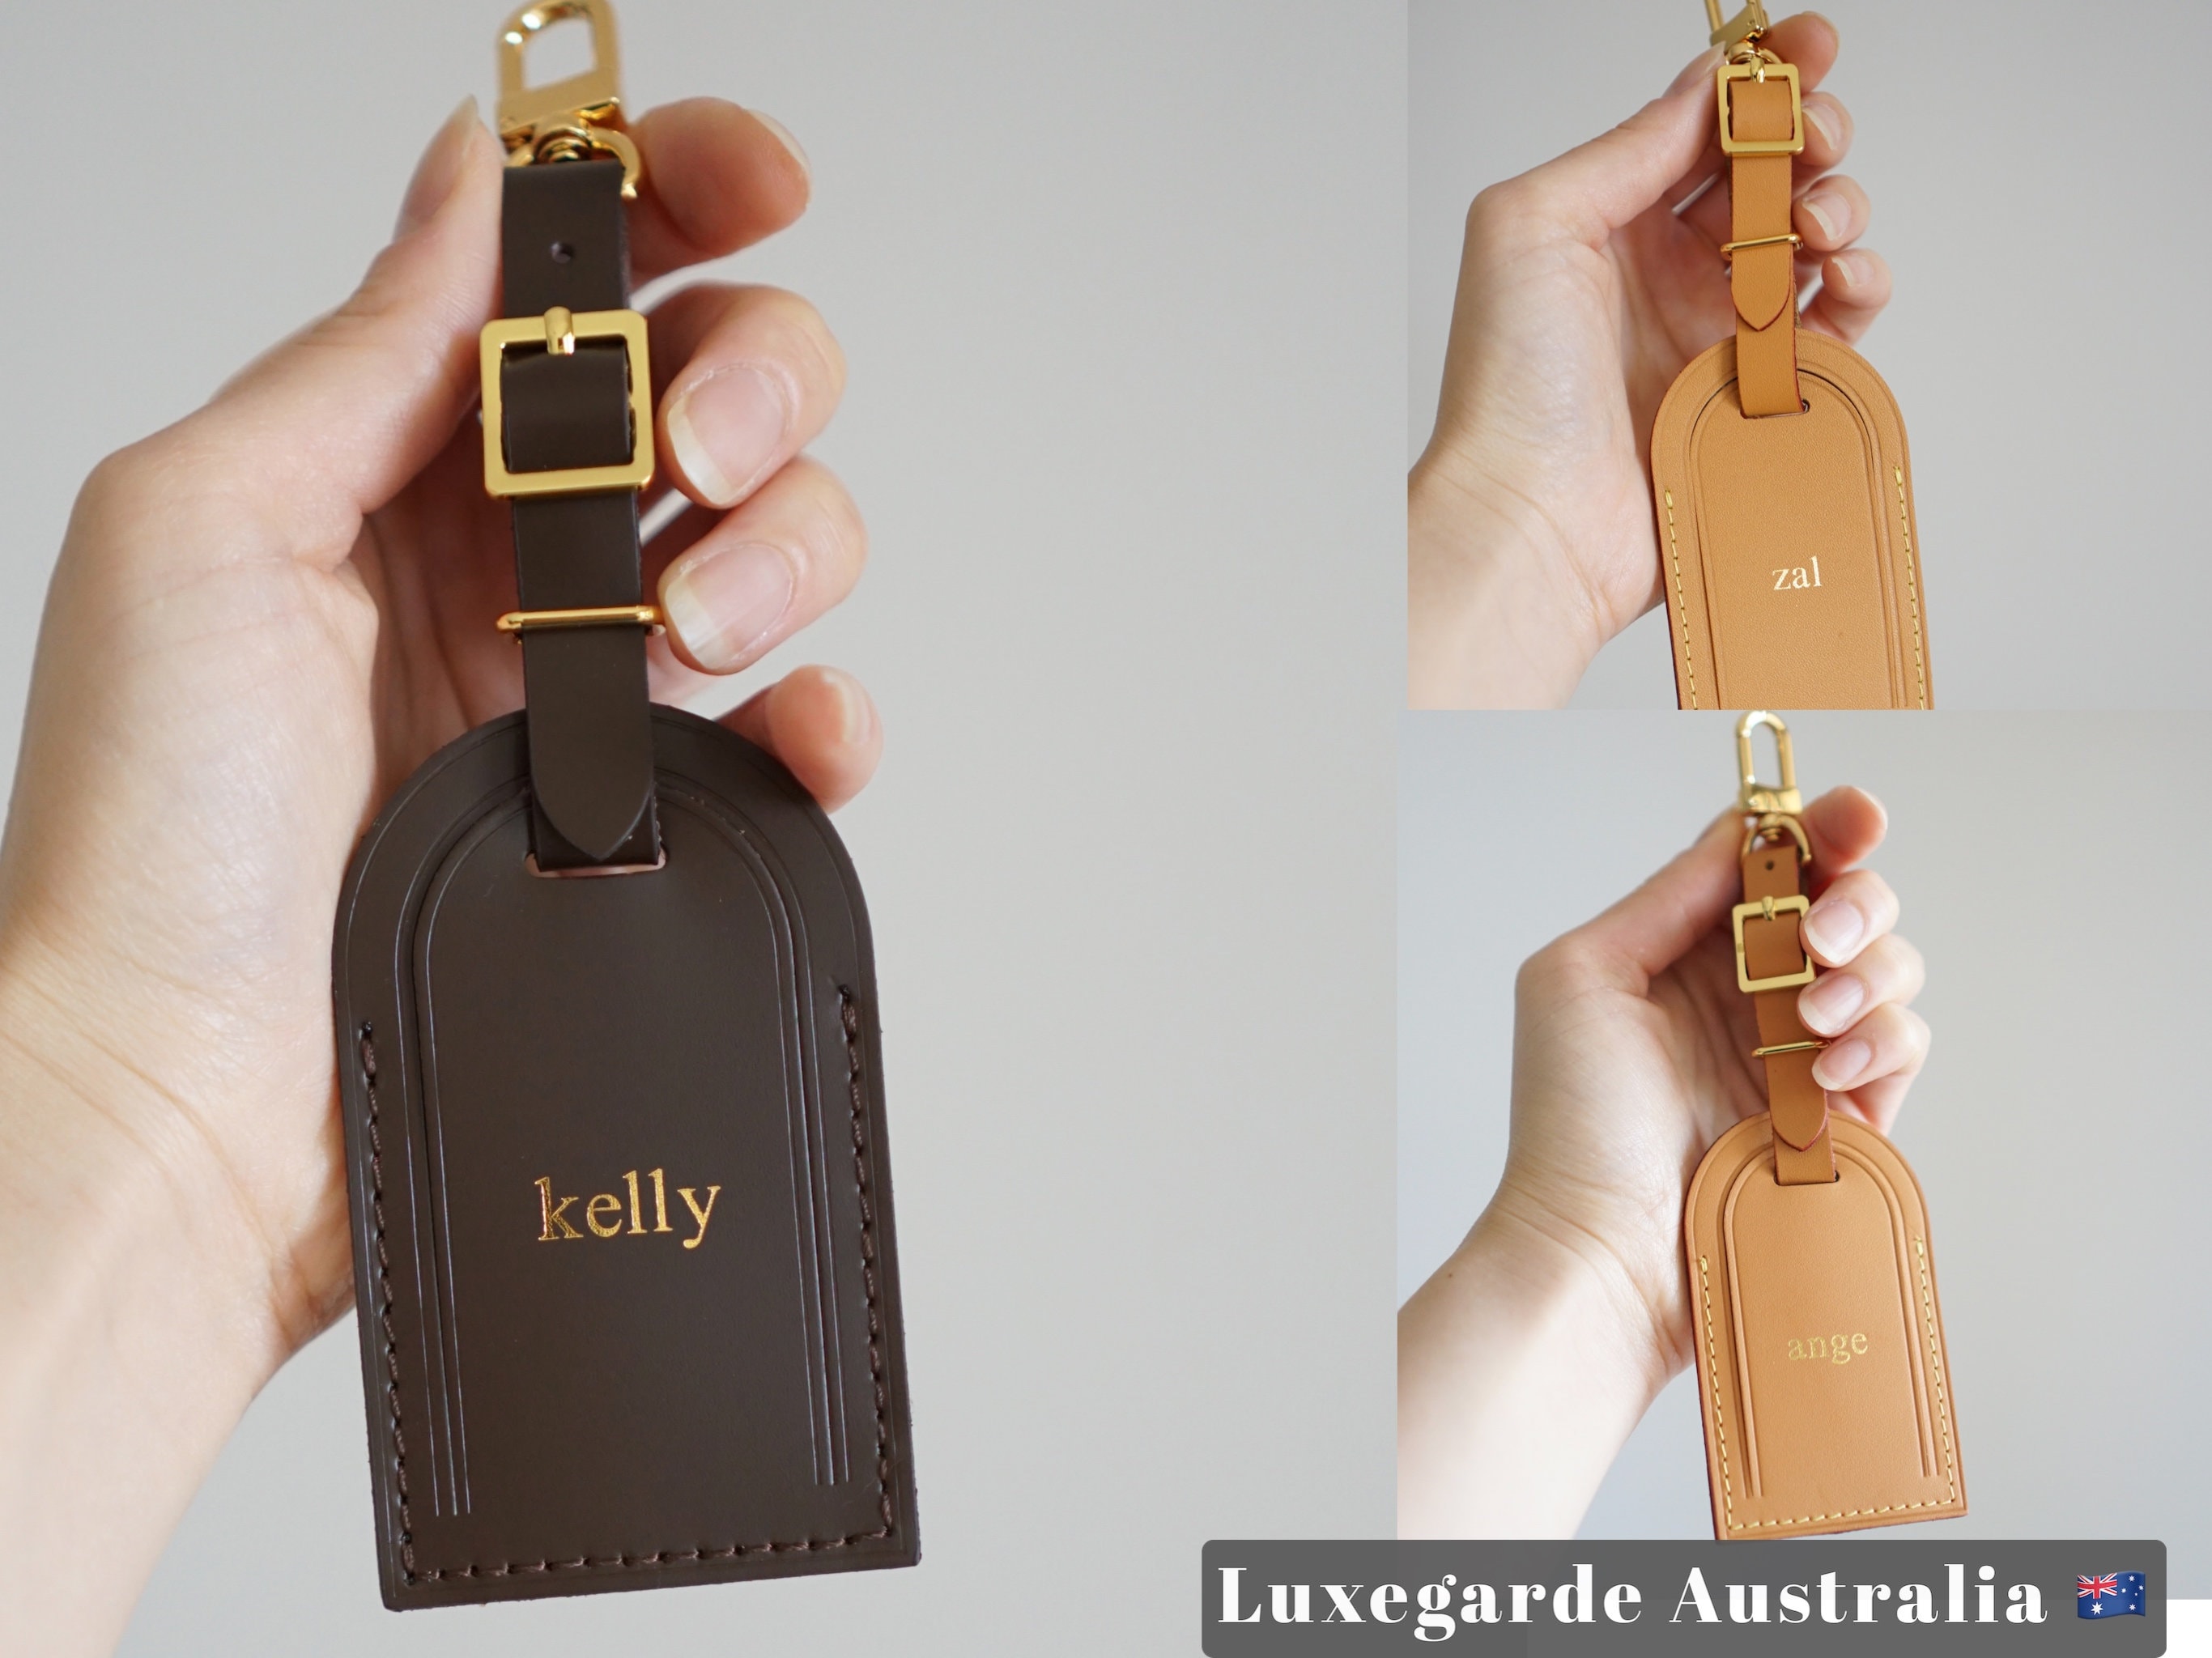 Louis Vuitton Leather Luggage Tag With Hot Stamp Letters T.N